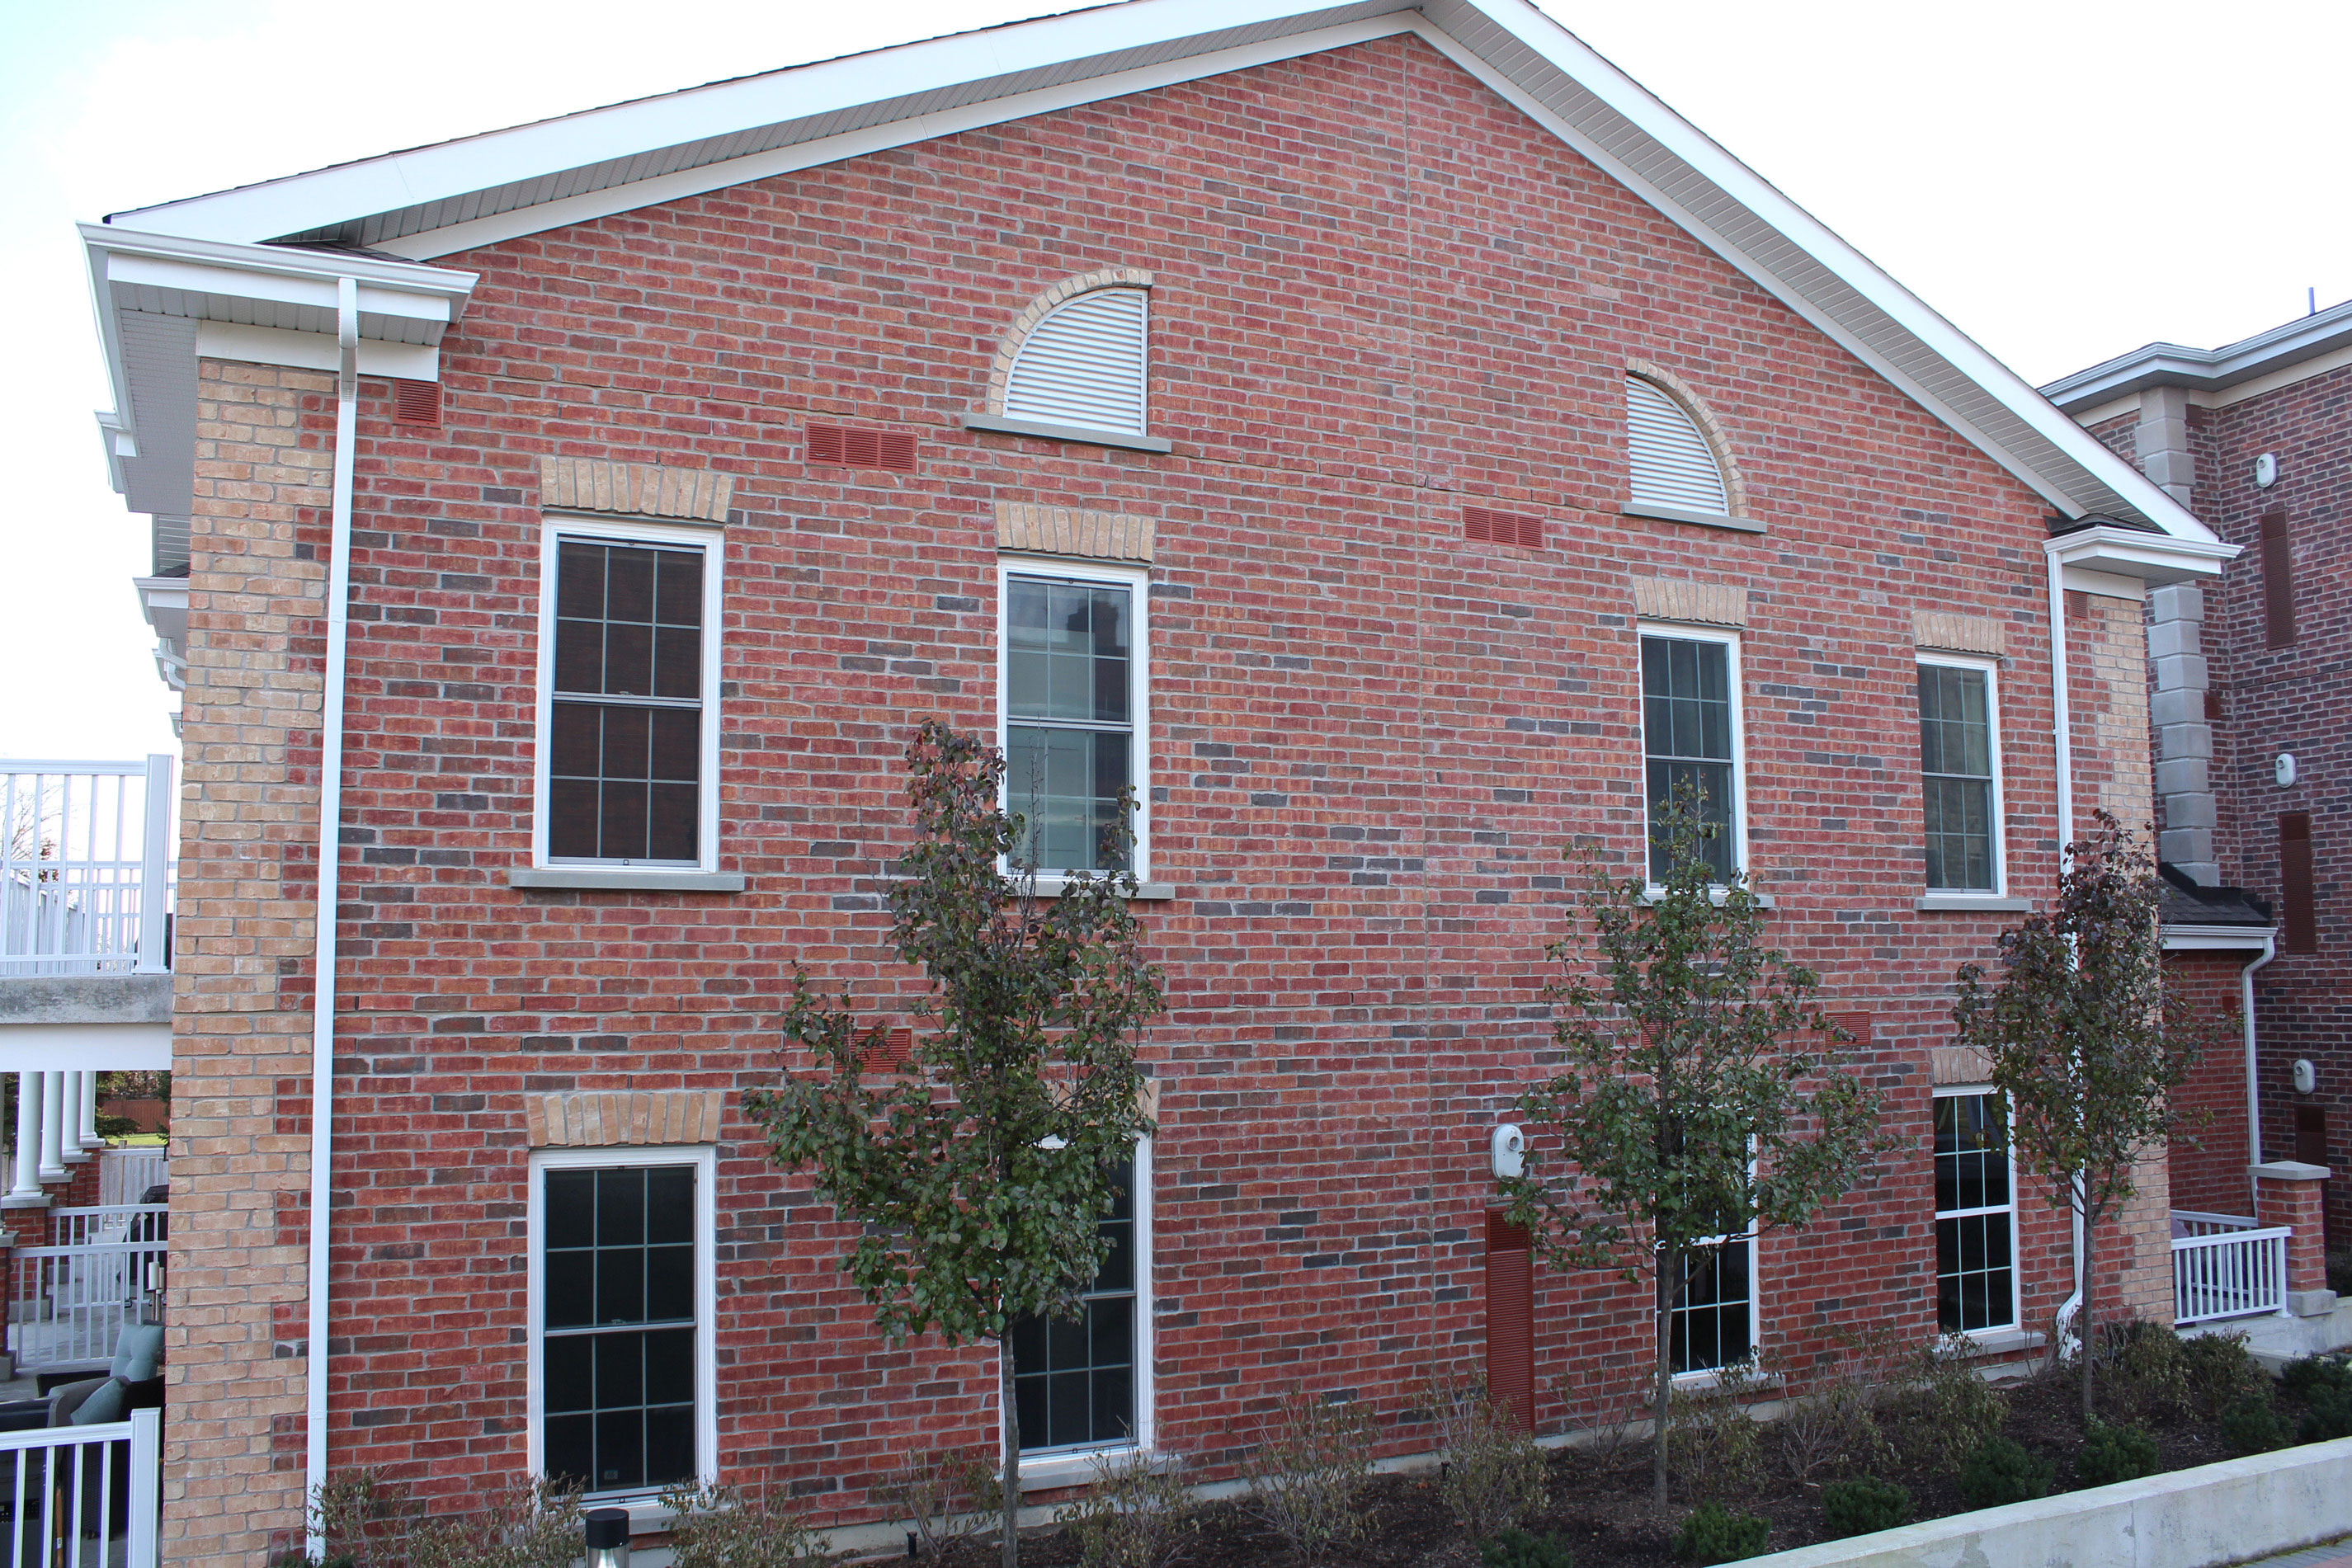 Side of Main building - Brick color is Olde Huron with Olde Cambridge accent